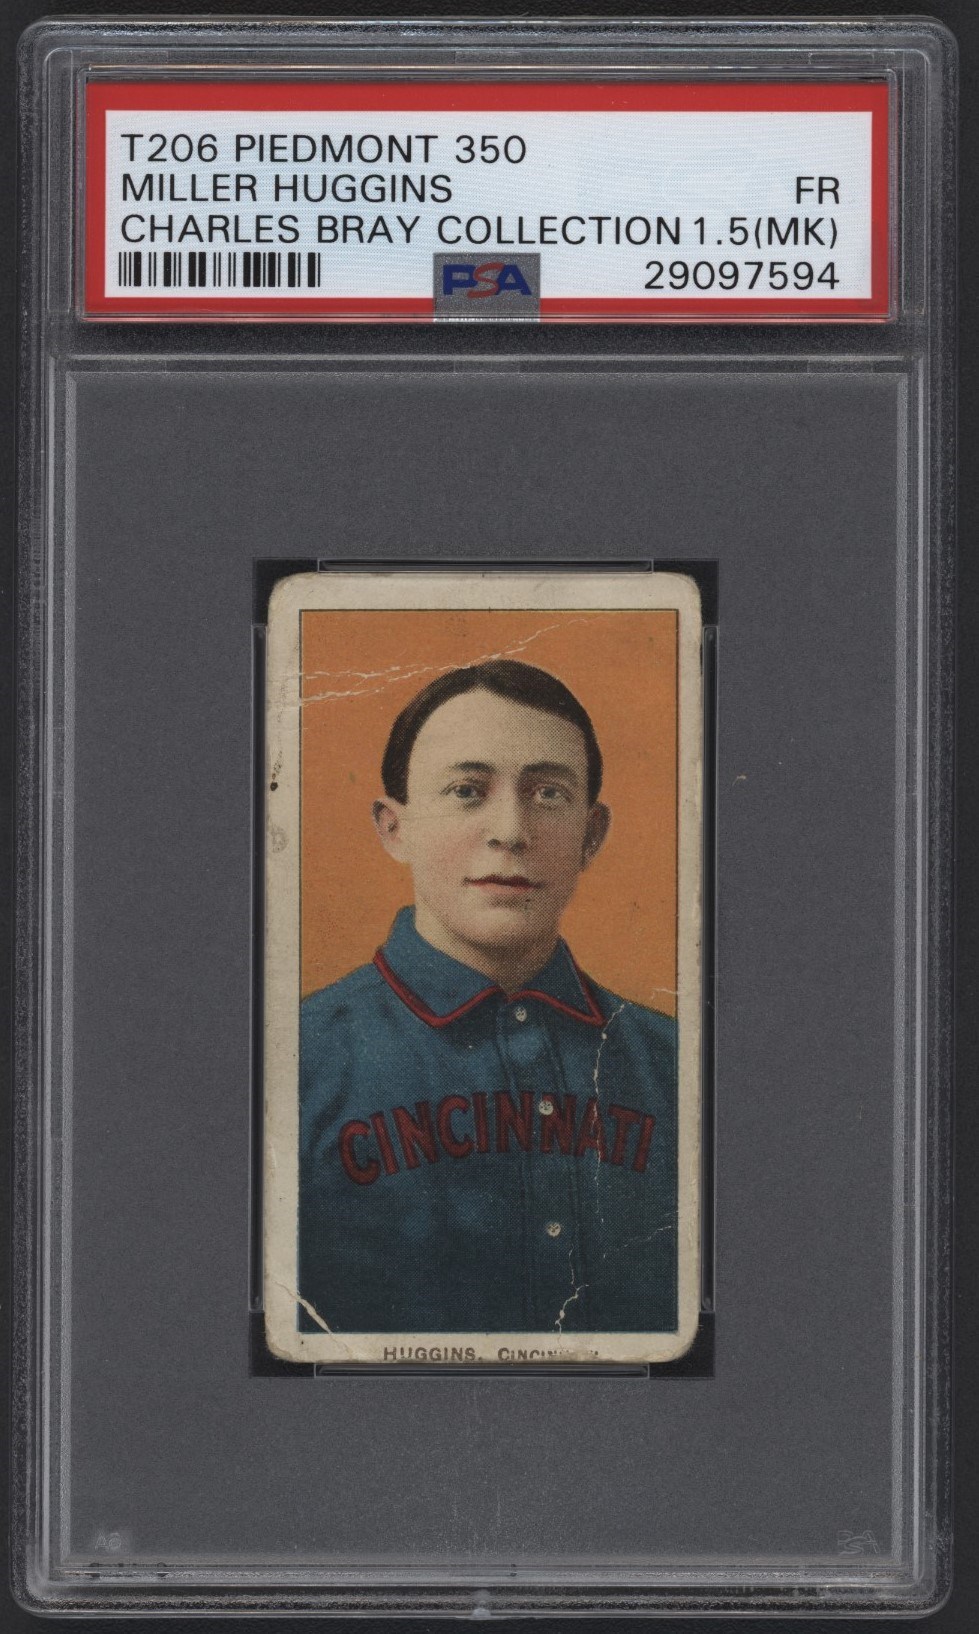 T206 Piedmont 350 Miller Huggins PSA 1.5 From the Charles Bray Collection